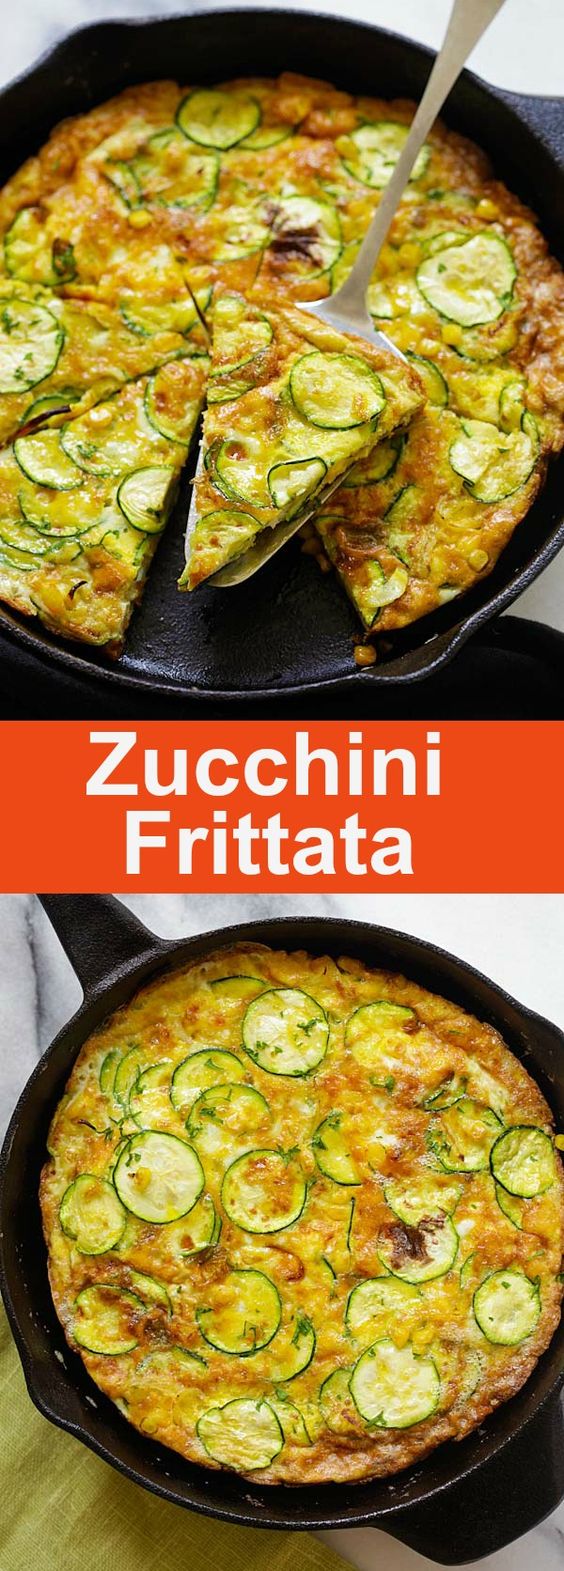 Zucchini Frittata – best and easiest frittata with zucchini and corn. Takes 15 mins to make with only 3 key ingredients, so good | rasamalaysia.com